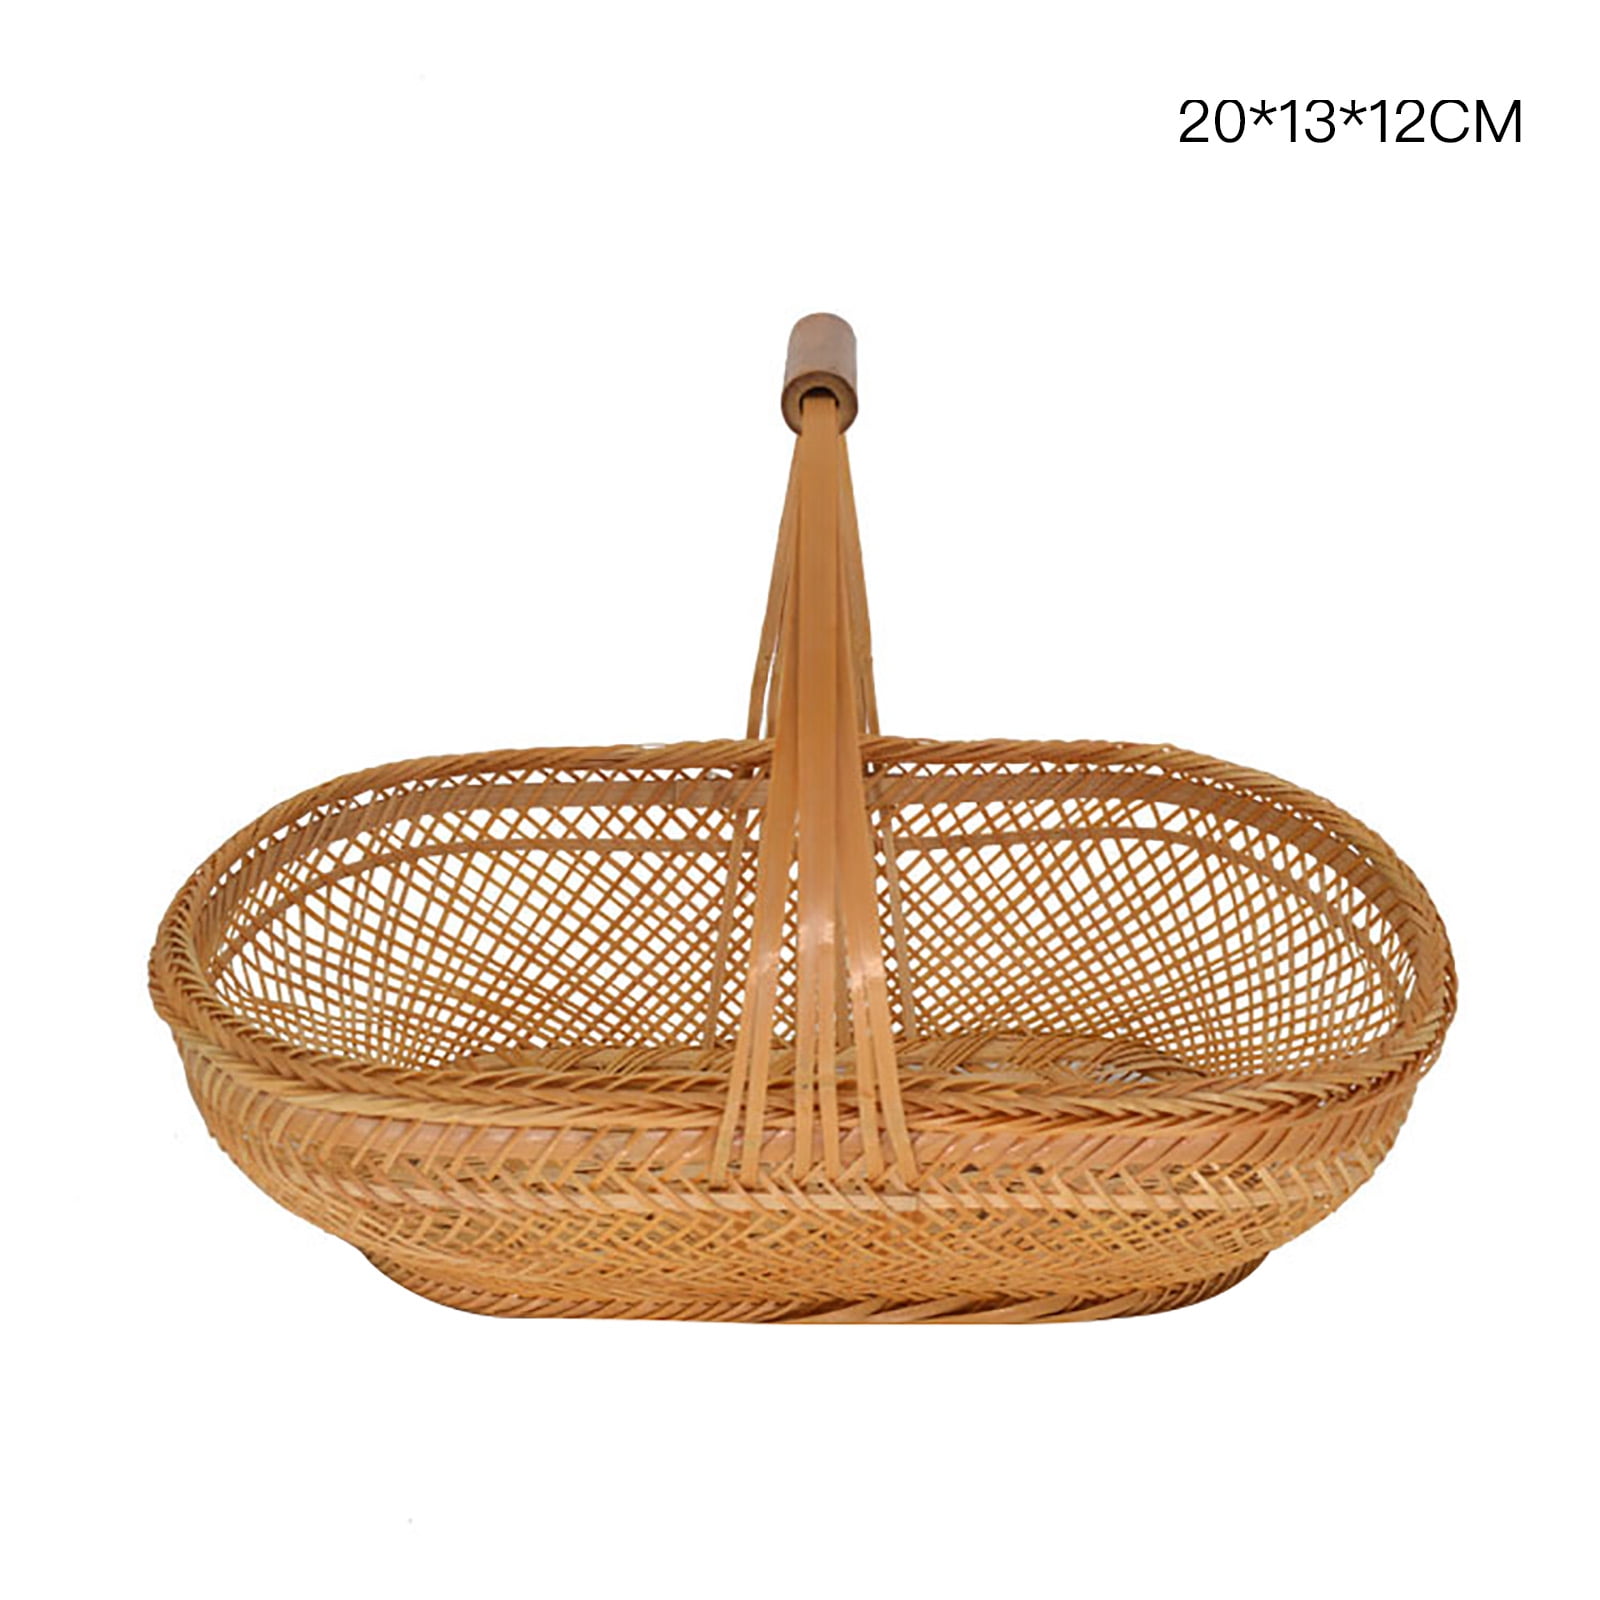 Bamboo Wicker Round Thai for Fruit Egg Basket Cooking Utensils Home Decor 1 pc 